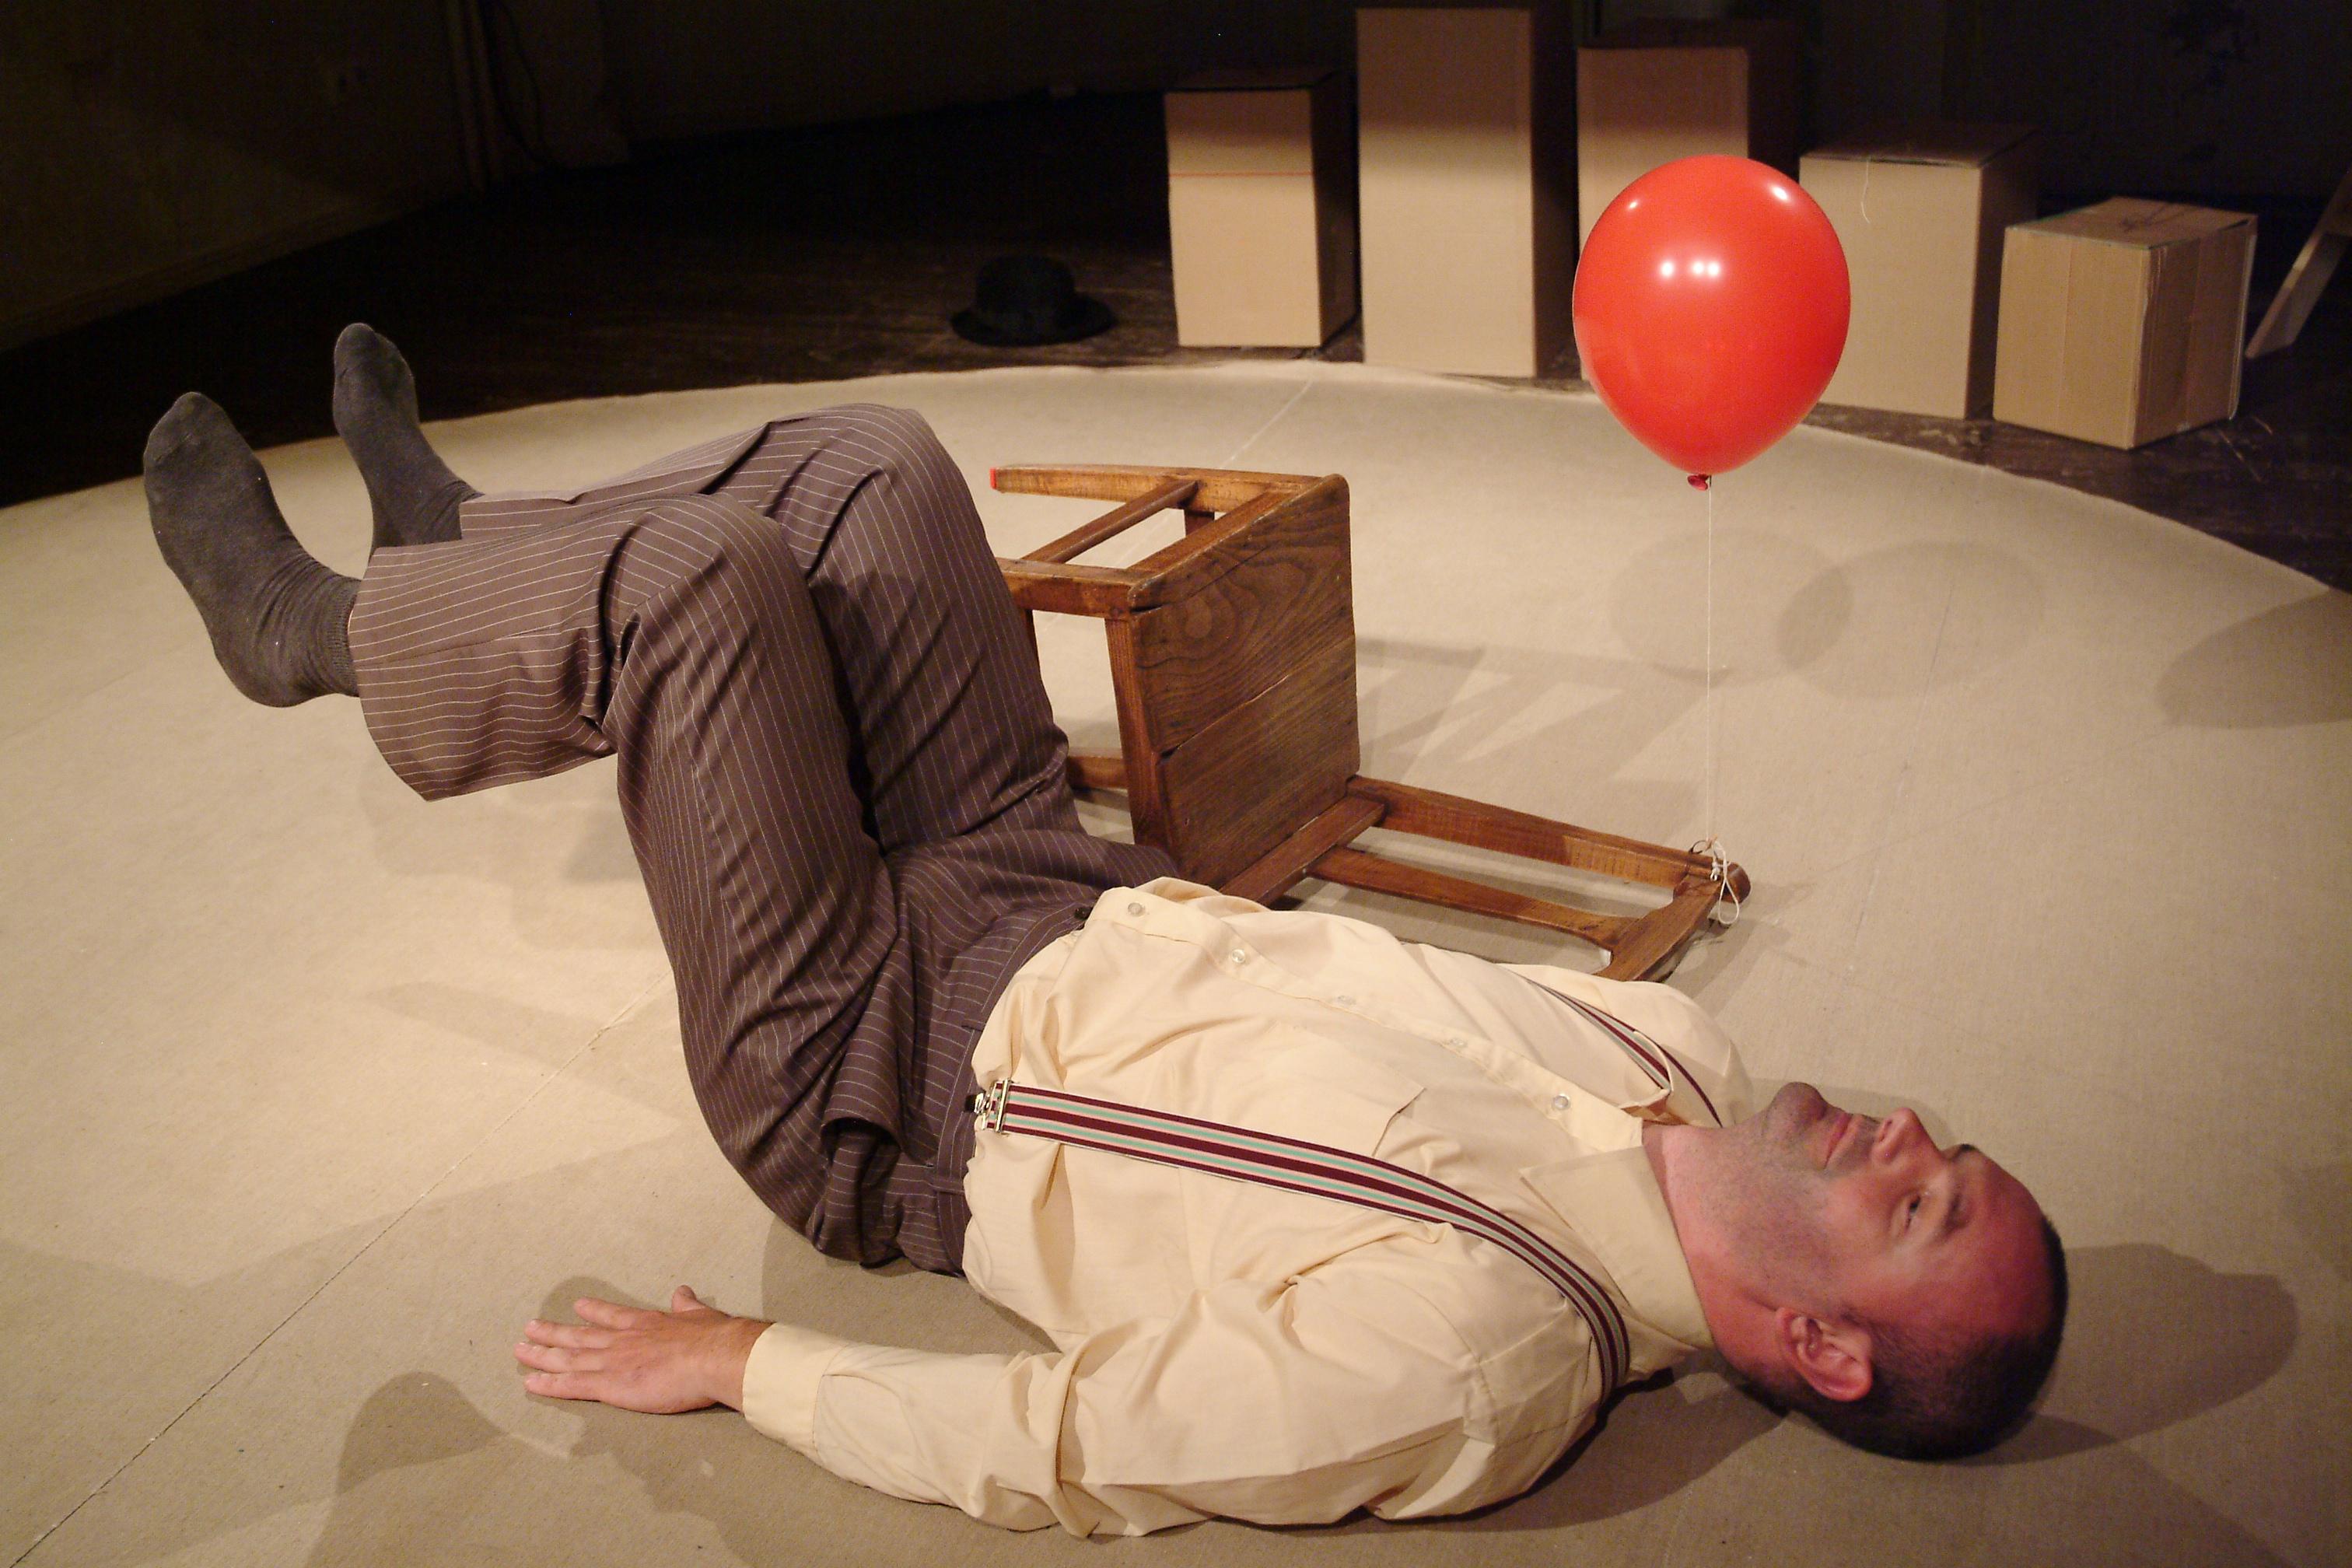 Michael is lying on the floor with his legs bent. Next to him is a chair in the same pose. A flying red balloon hangs from the chair.